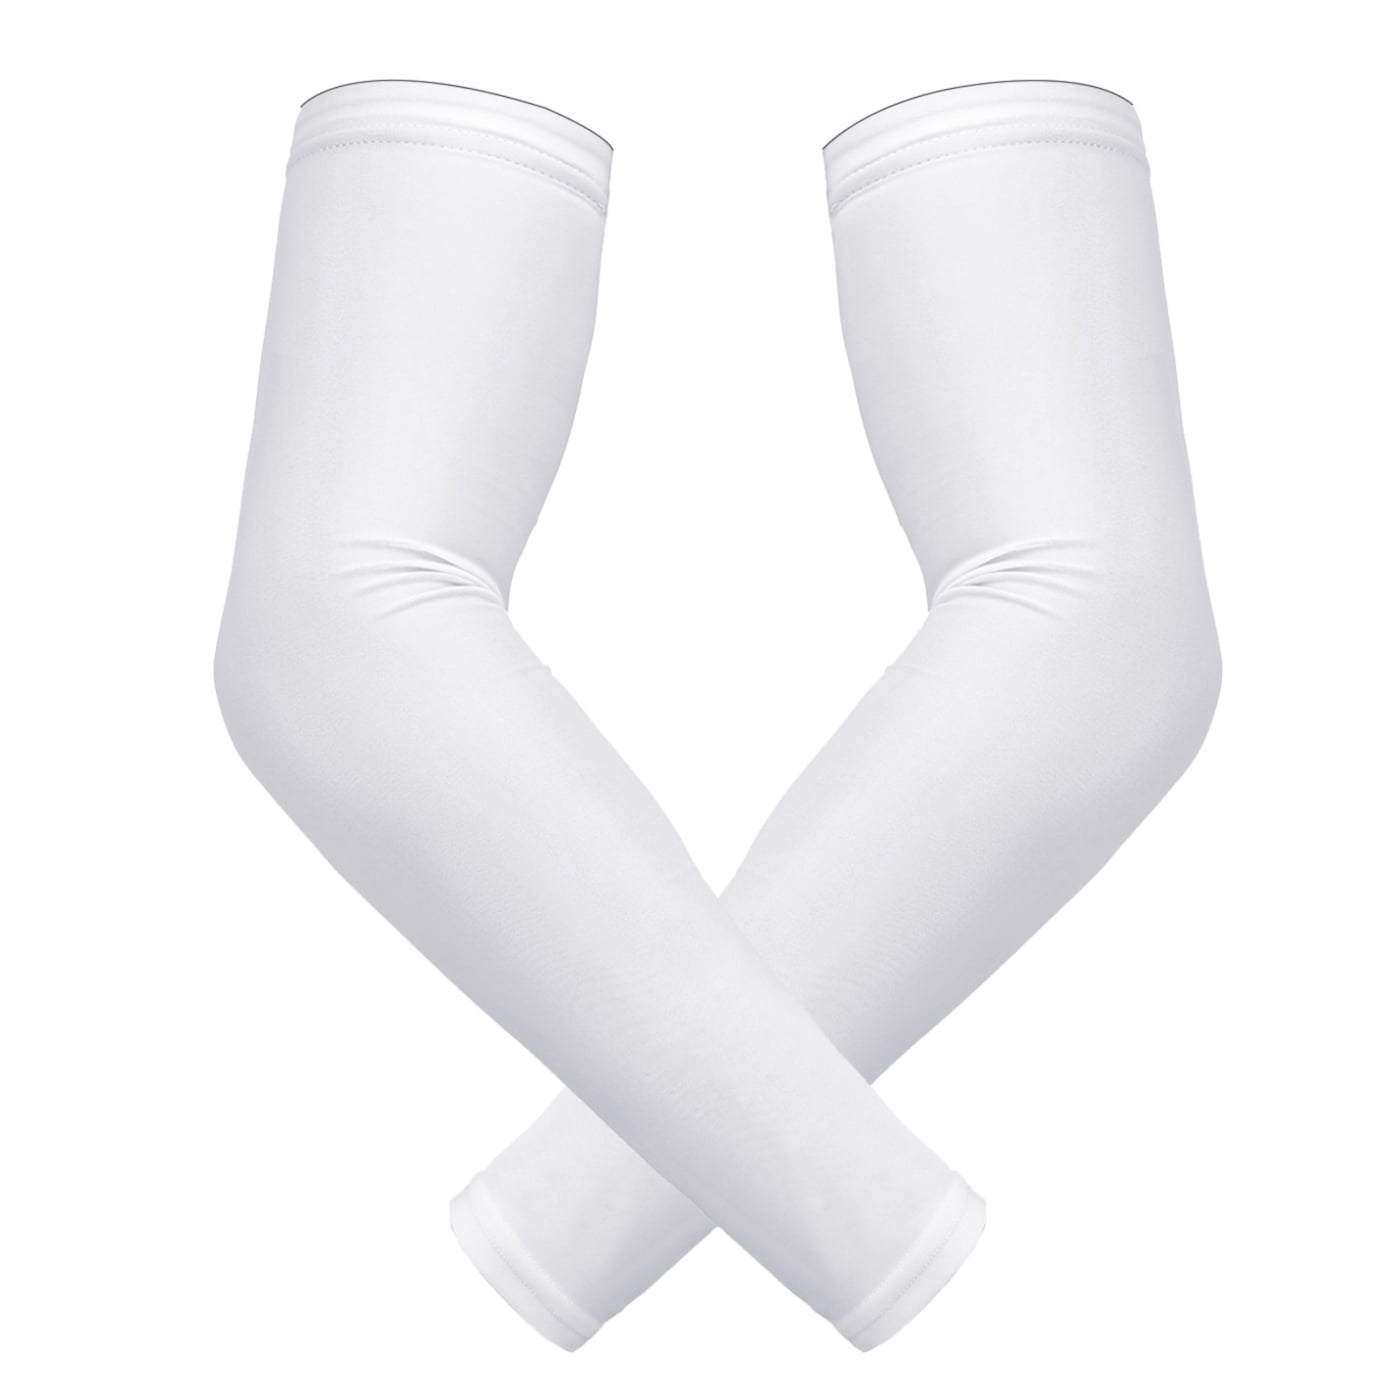 White, Medium Athletic & Shooting Sleeve for Youth Sports Compression Arm Sleeves Men & Women Kids 